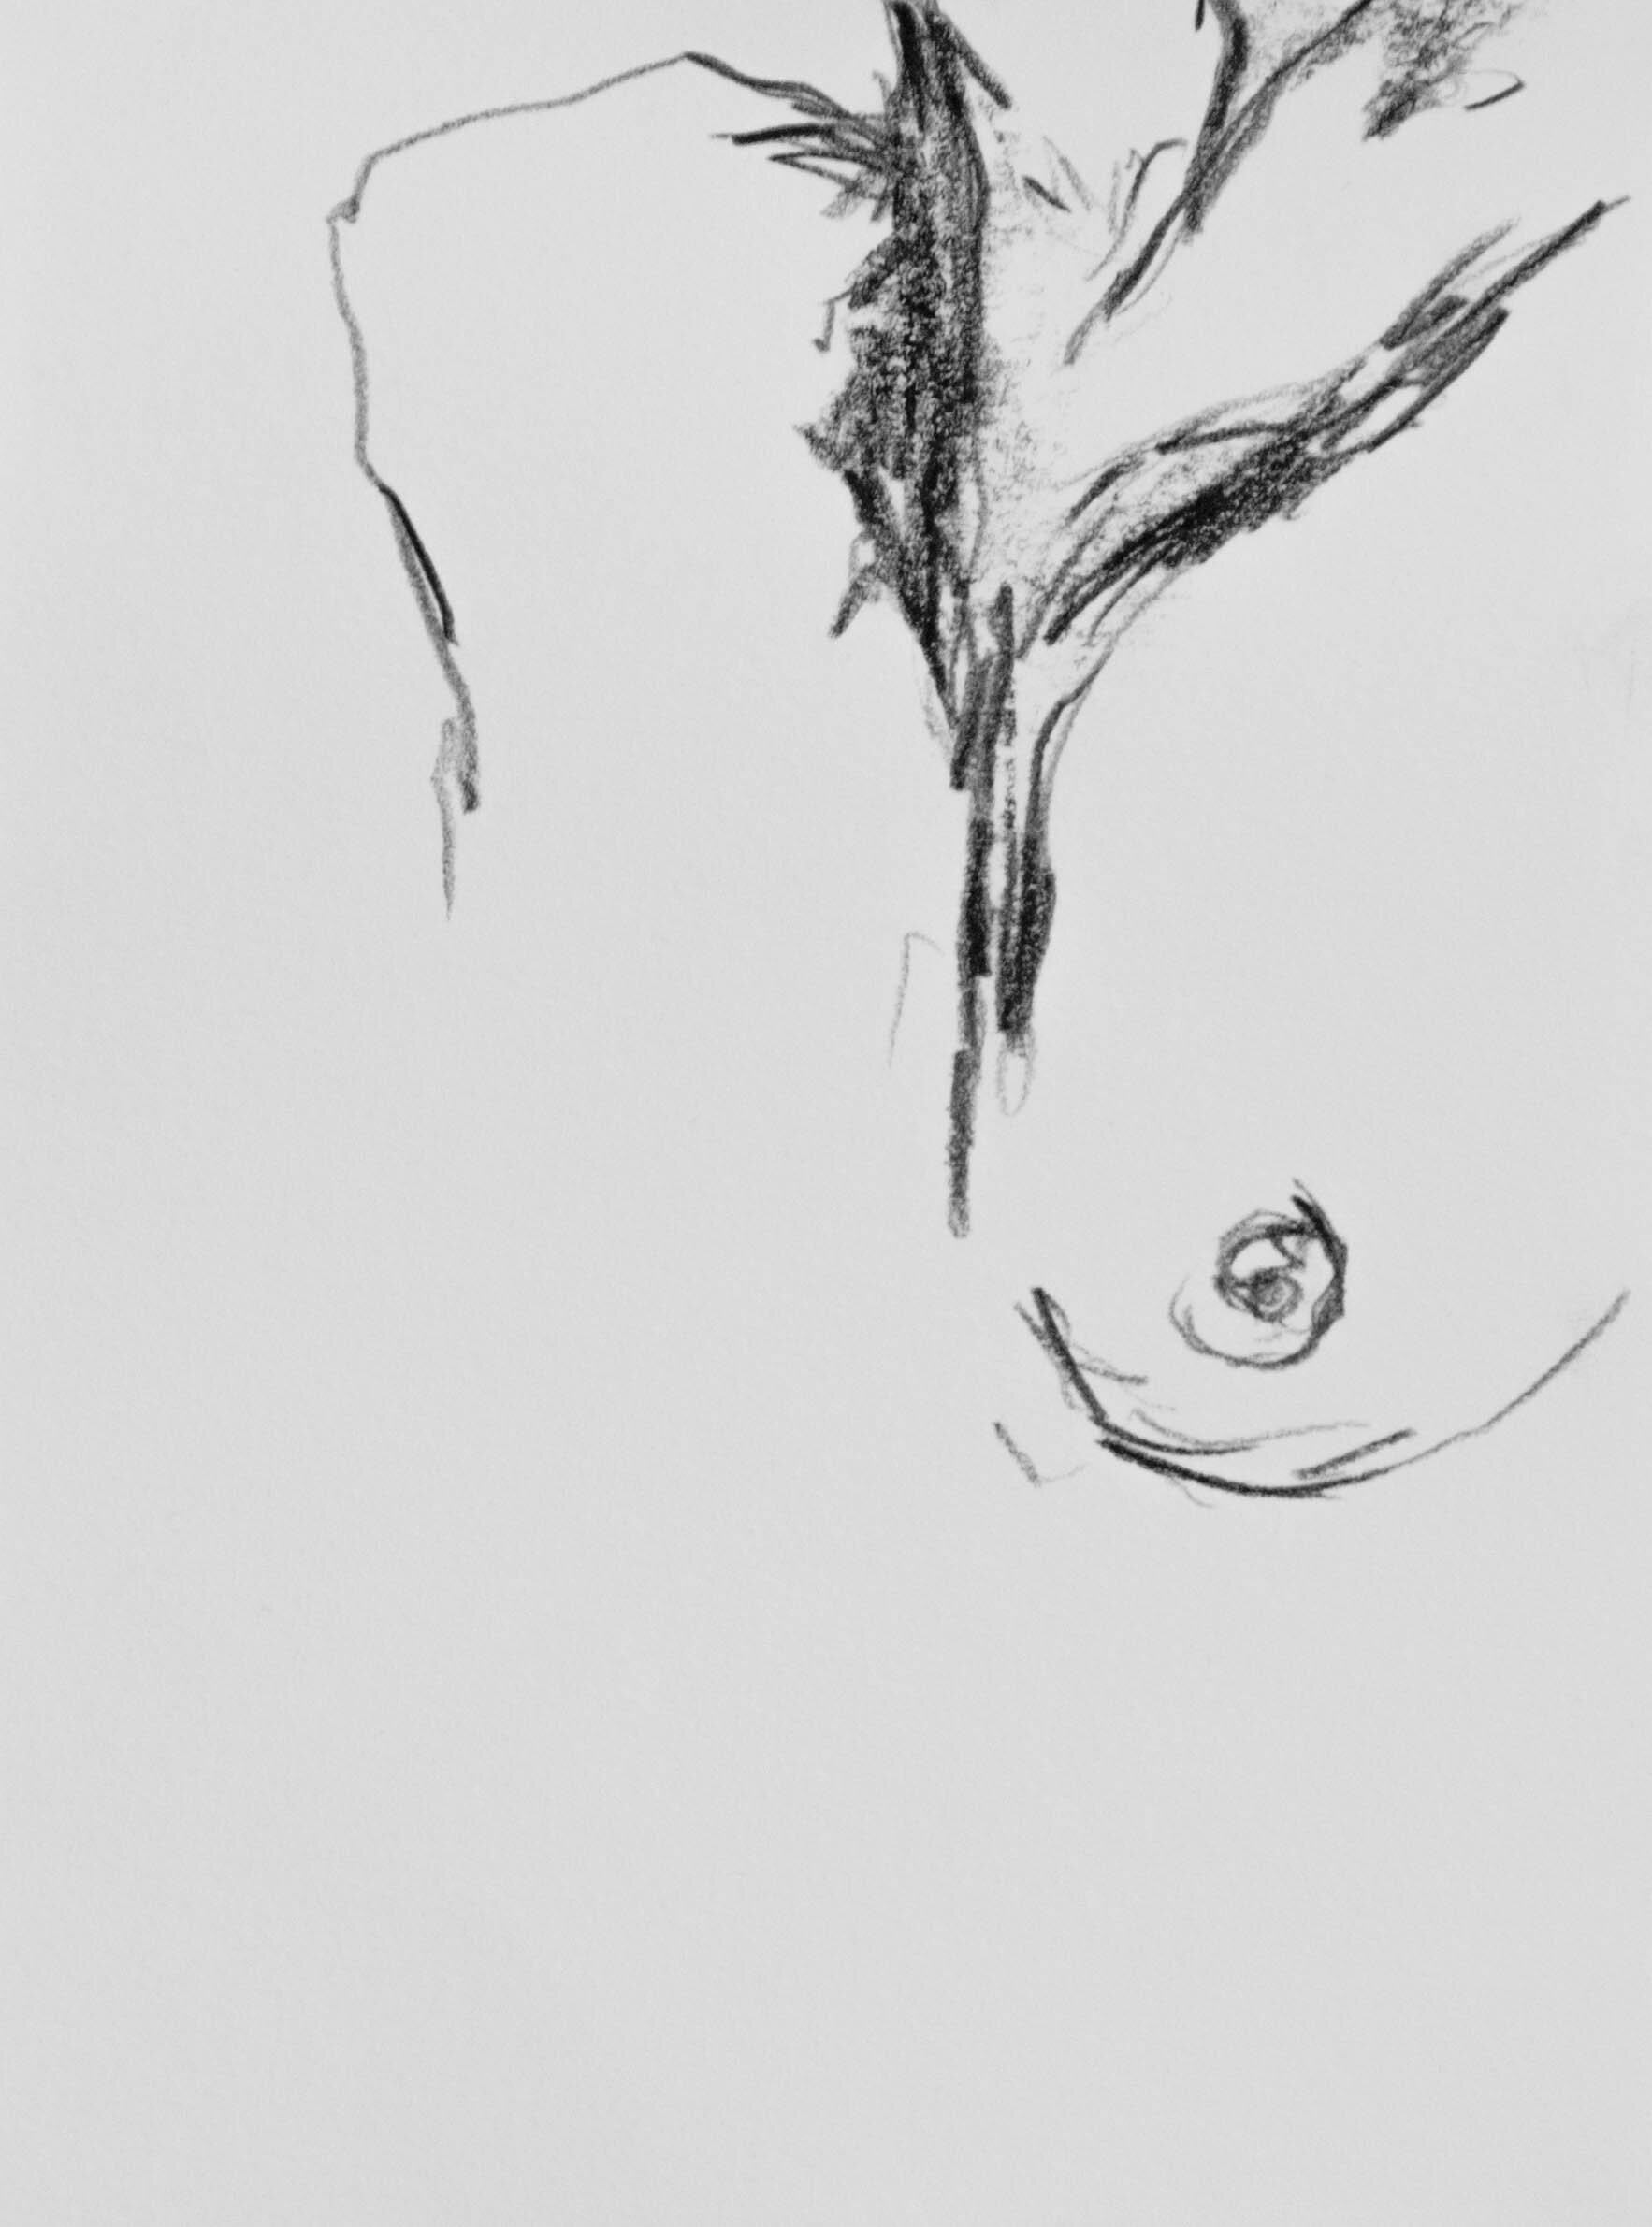  charcoal on paper, 18x13 cm, 2018 